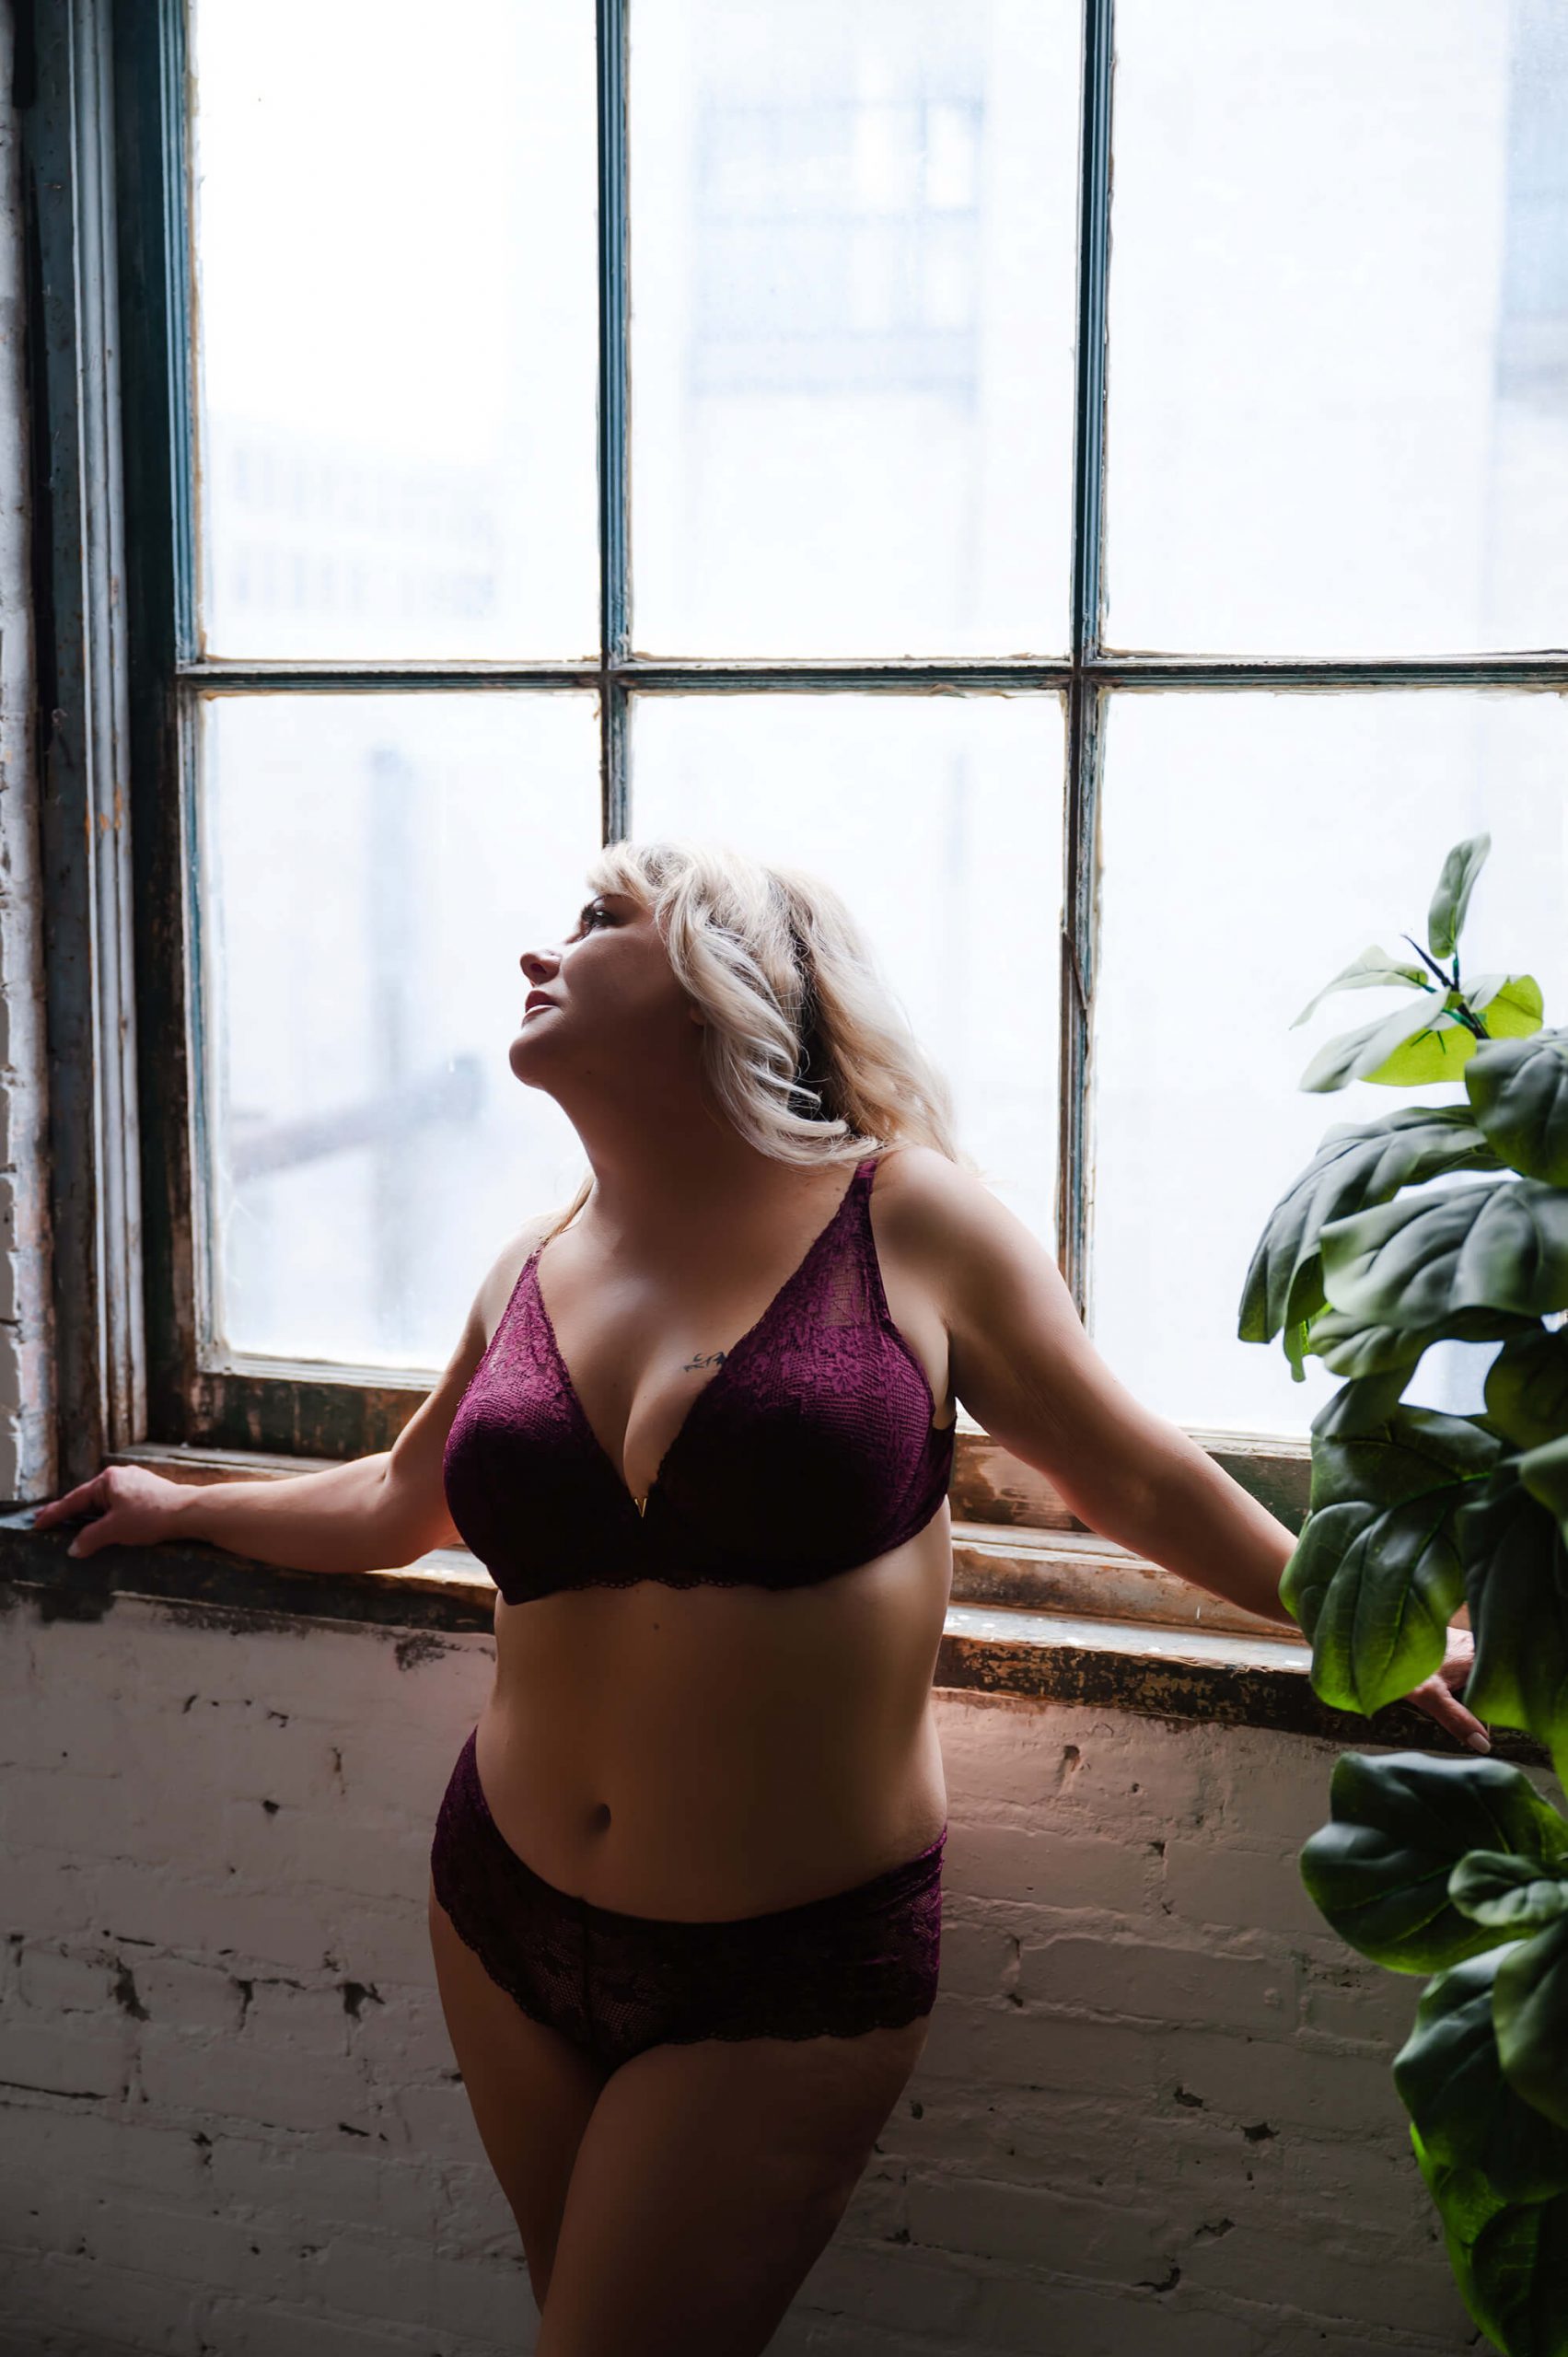 5 Awesome Lingerie Brands for Big Breasts In Boudoir — Society Boudoir